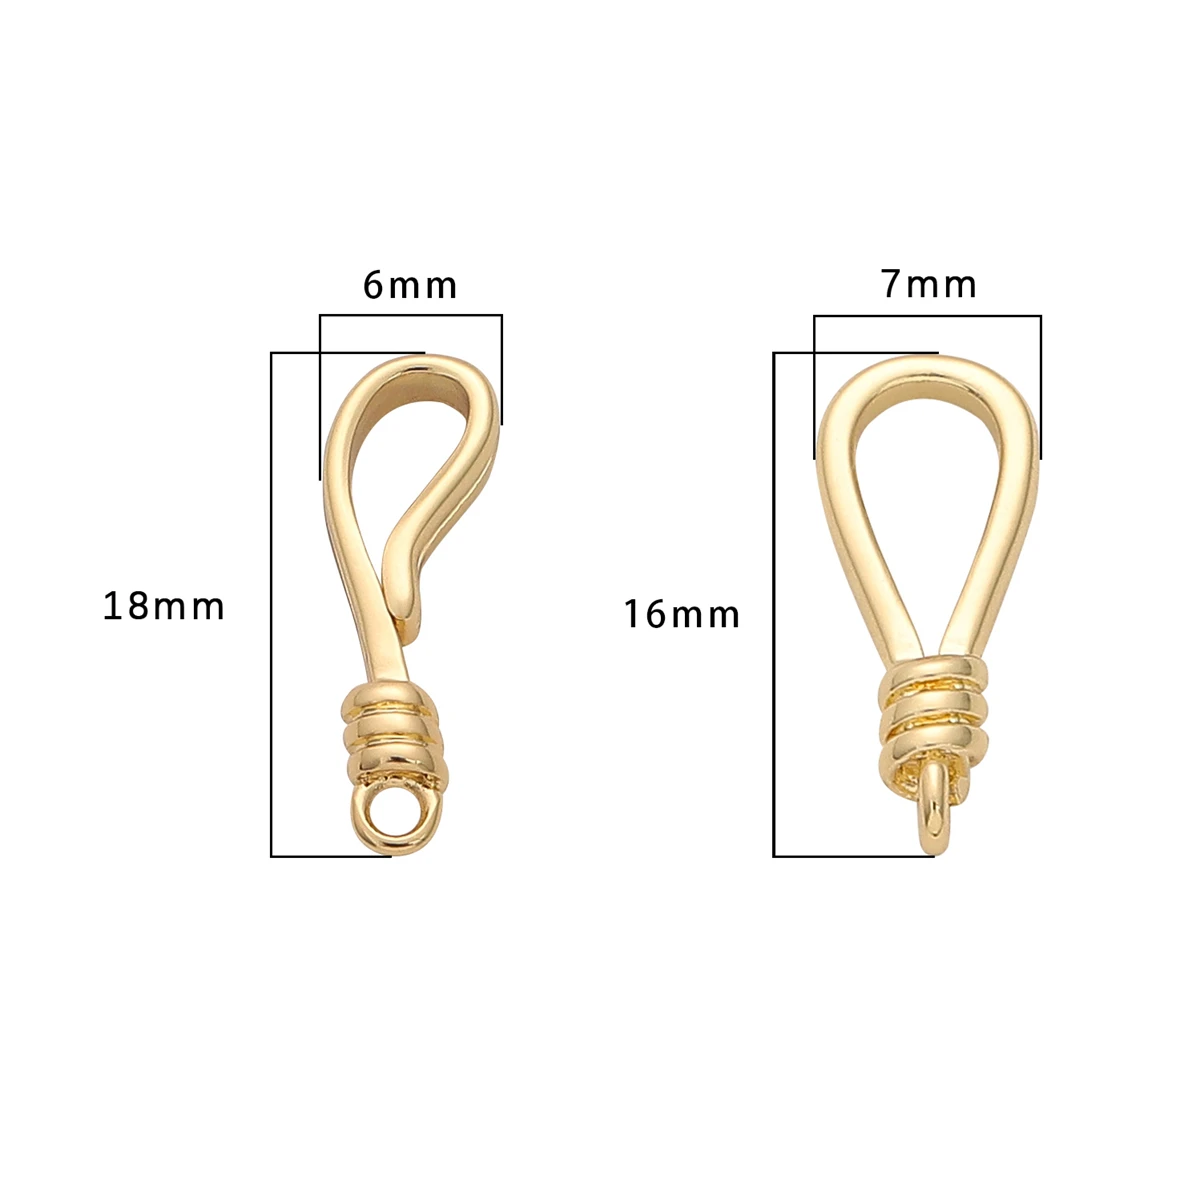 https://ae01.alicdn.com/kf/S898a9d591b9547eeb744b72c6c2a4a8fK/1Set-14K-Gold-Plated-Brass-Copper-Jewelry-End-Clasp-Fish-Hook-Clasp-for-DIY-Necklace-Bracelet.jpg